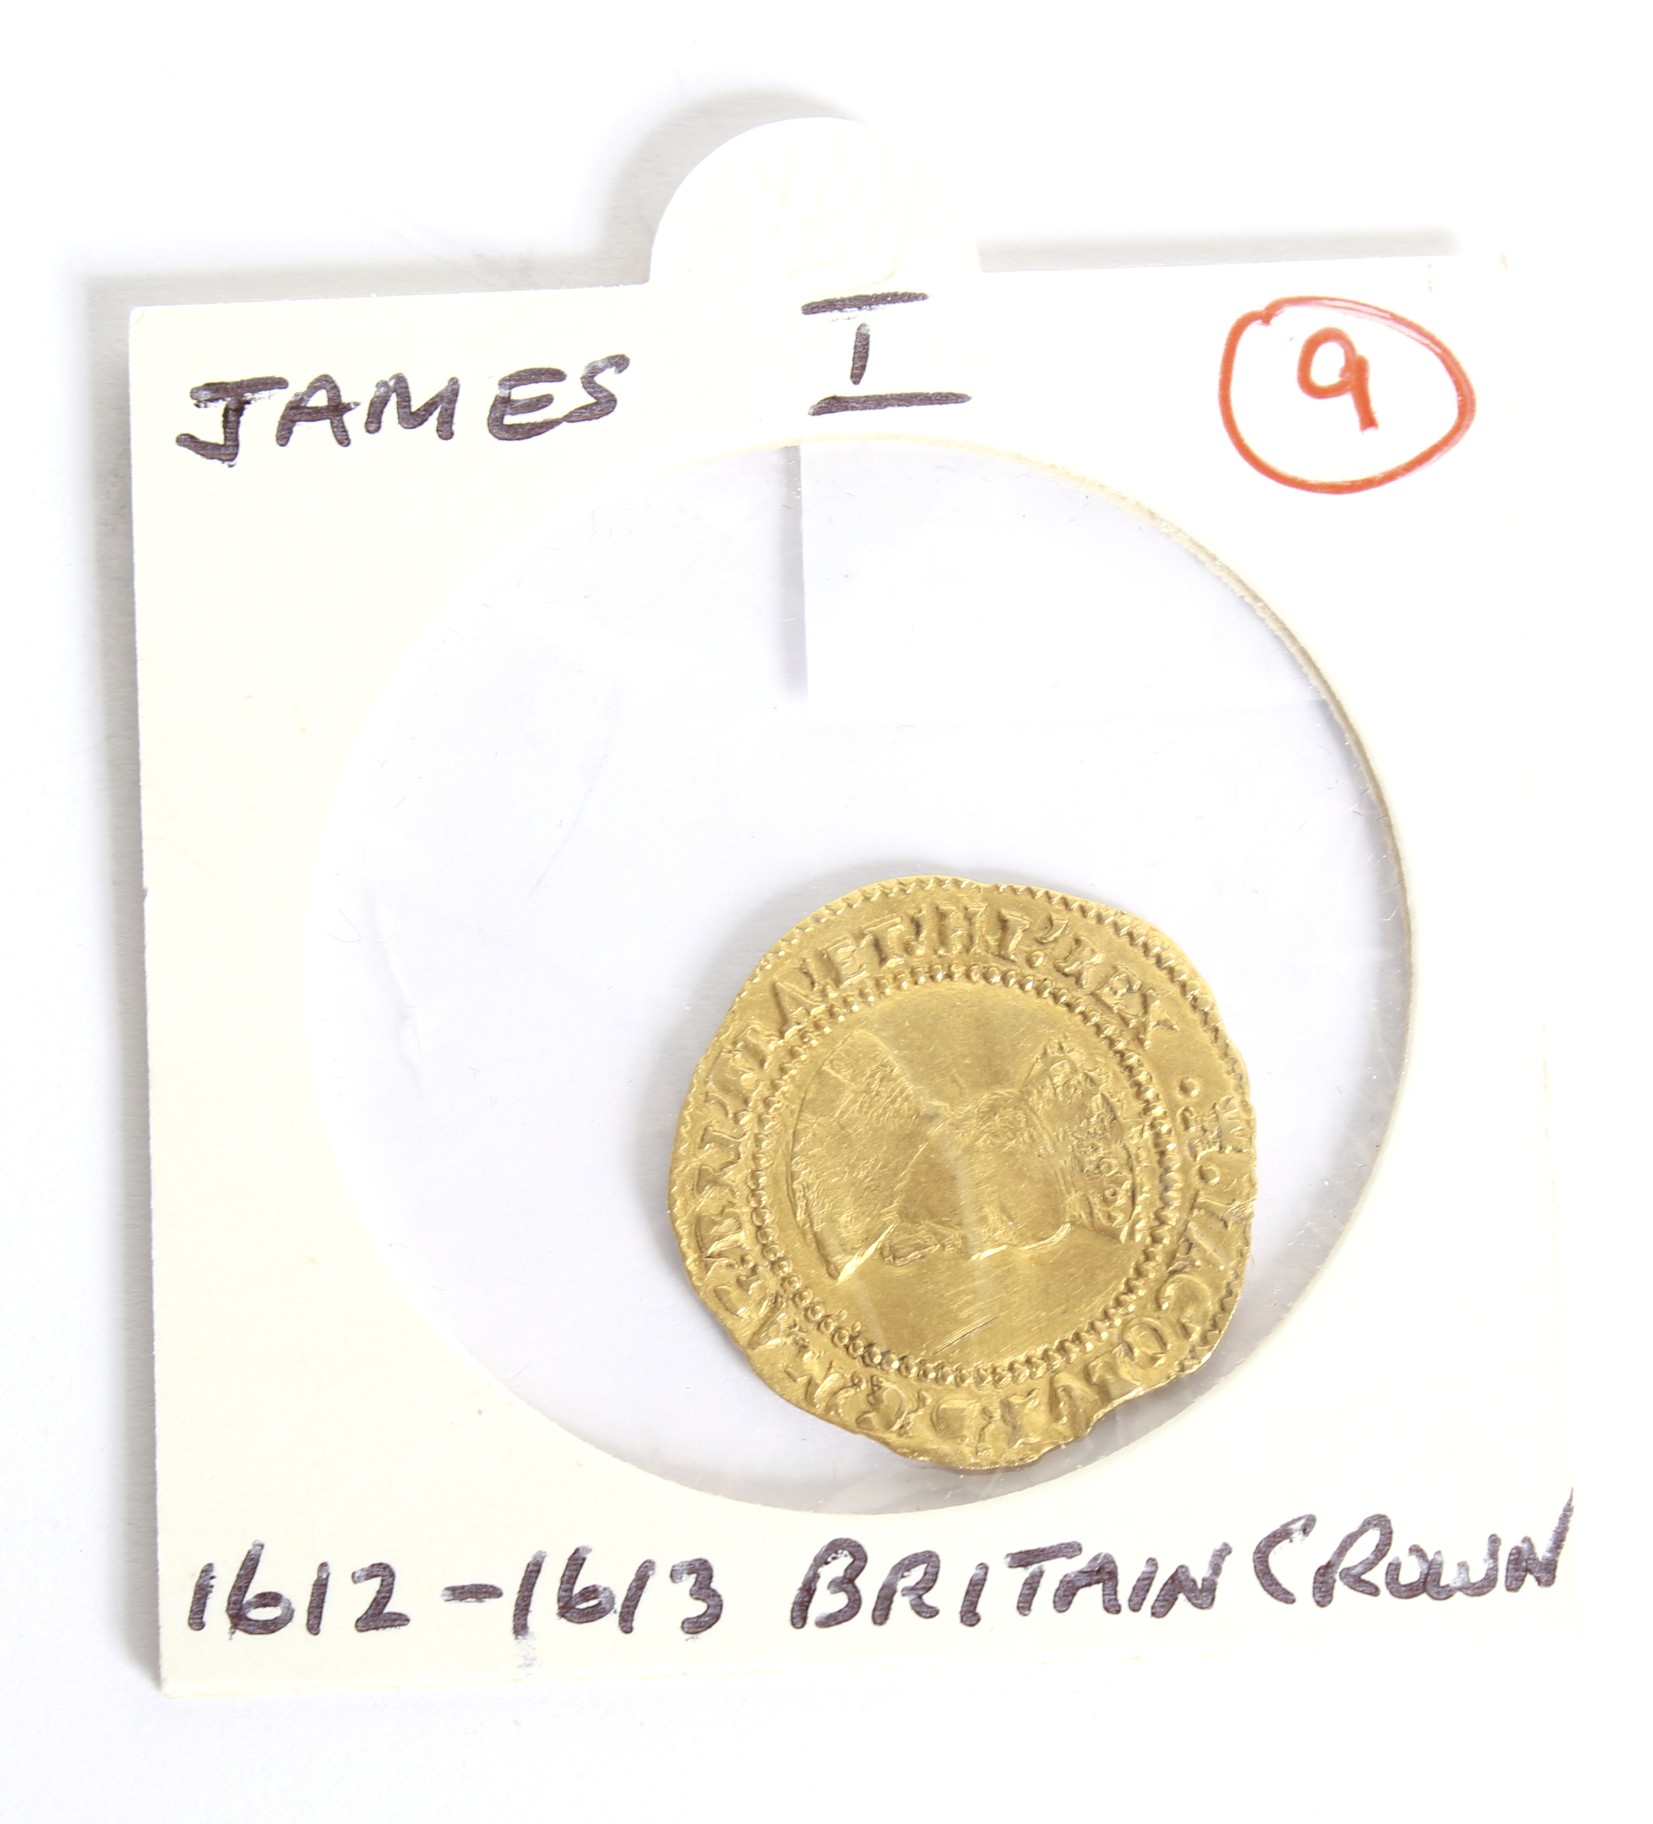 1612-1913 James I gold Britain crown coin.